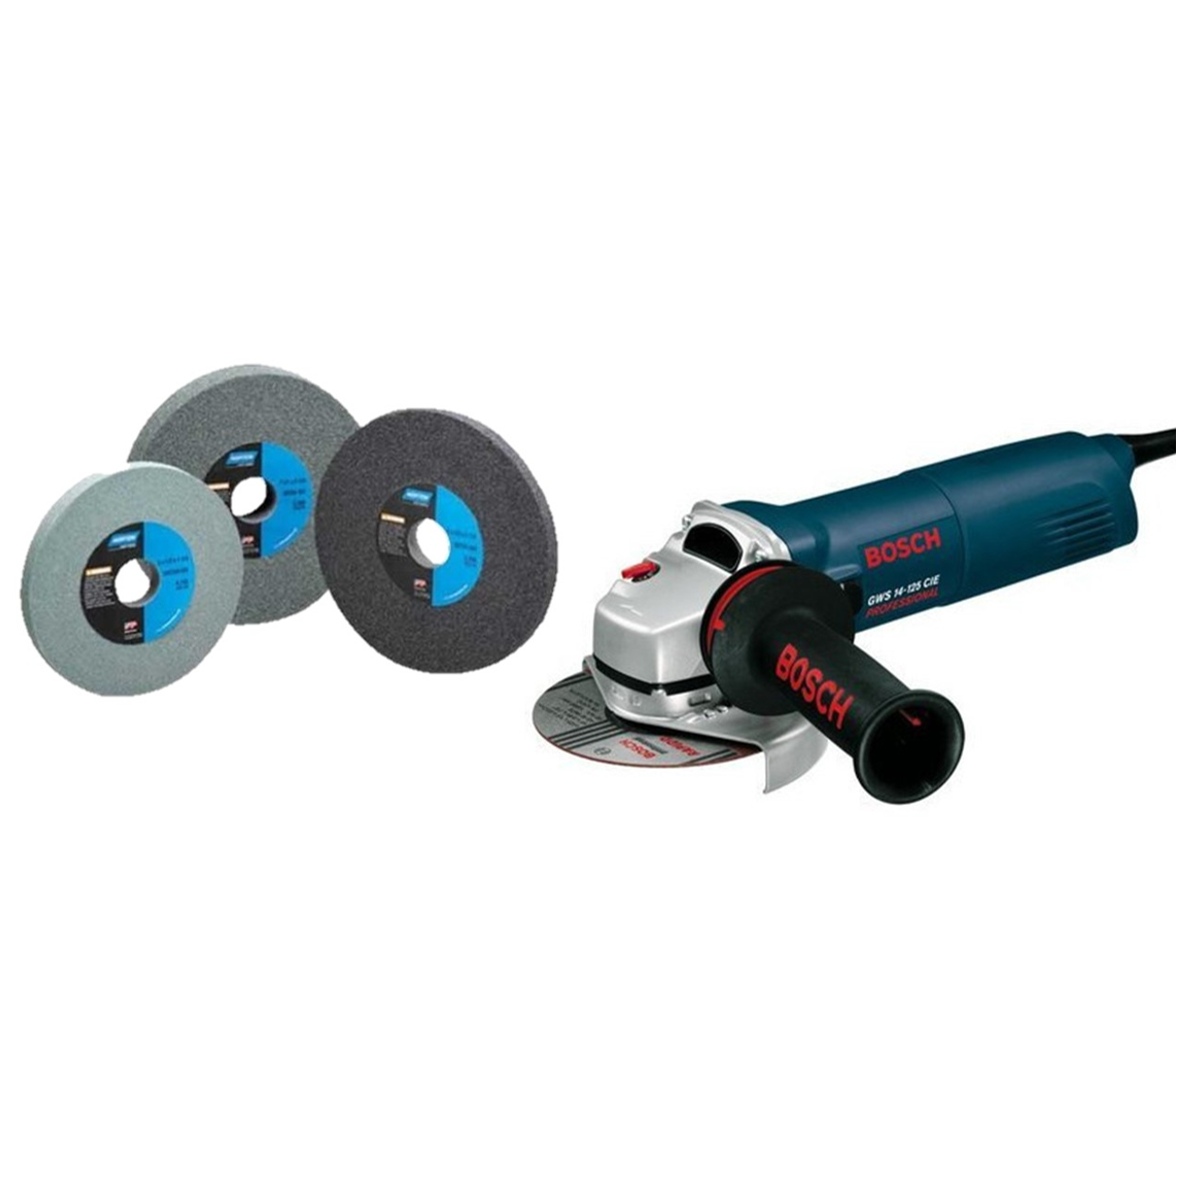 All About Grinding & Abrasive Accessories